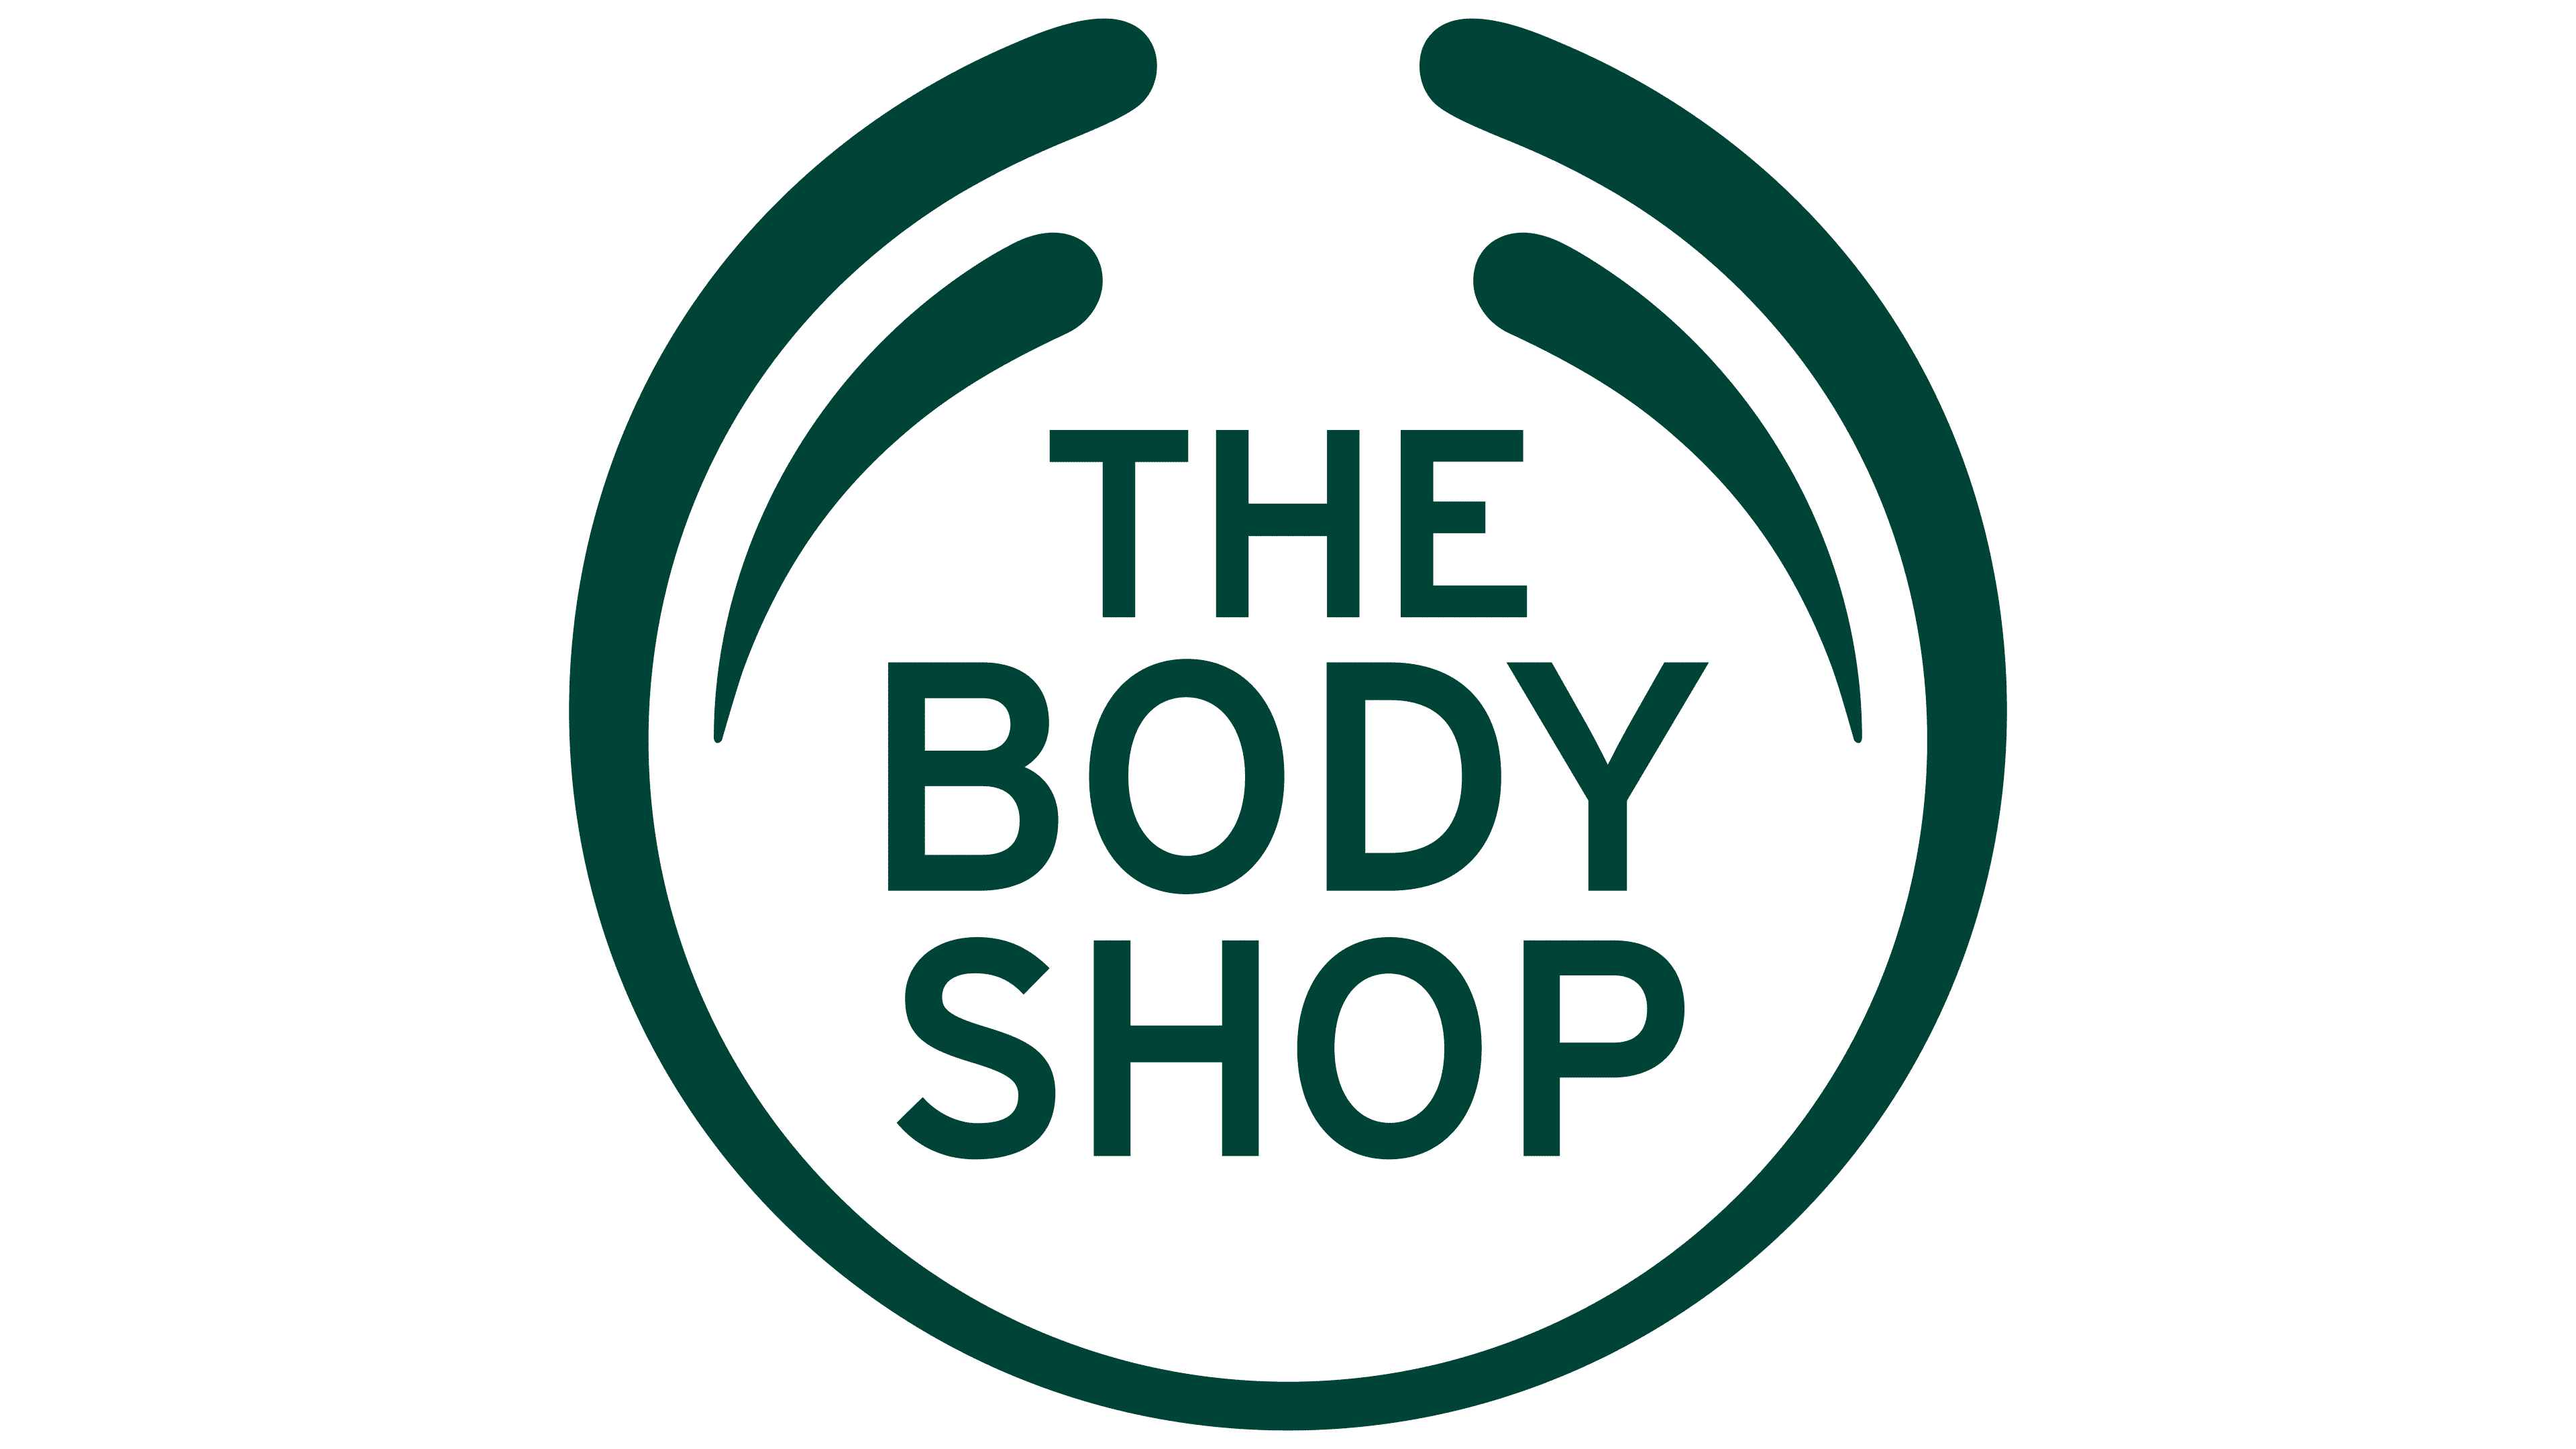 The Body Shop - Get a FREE Vitamin C Kit with Orders Over Â£39!